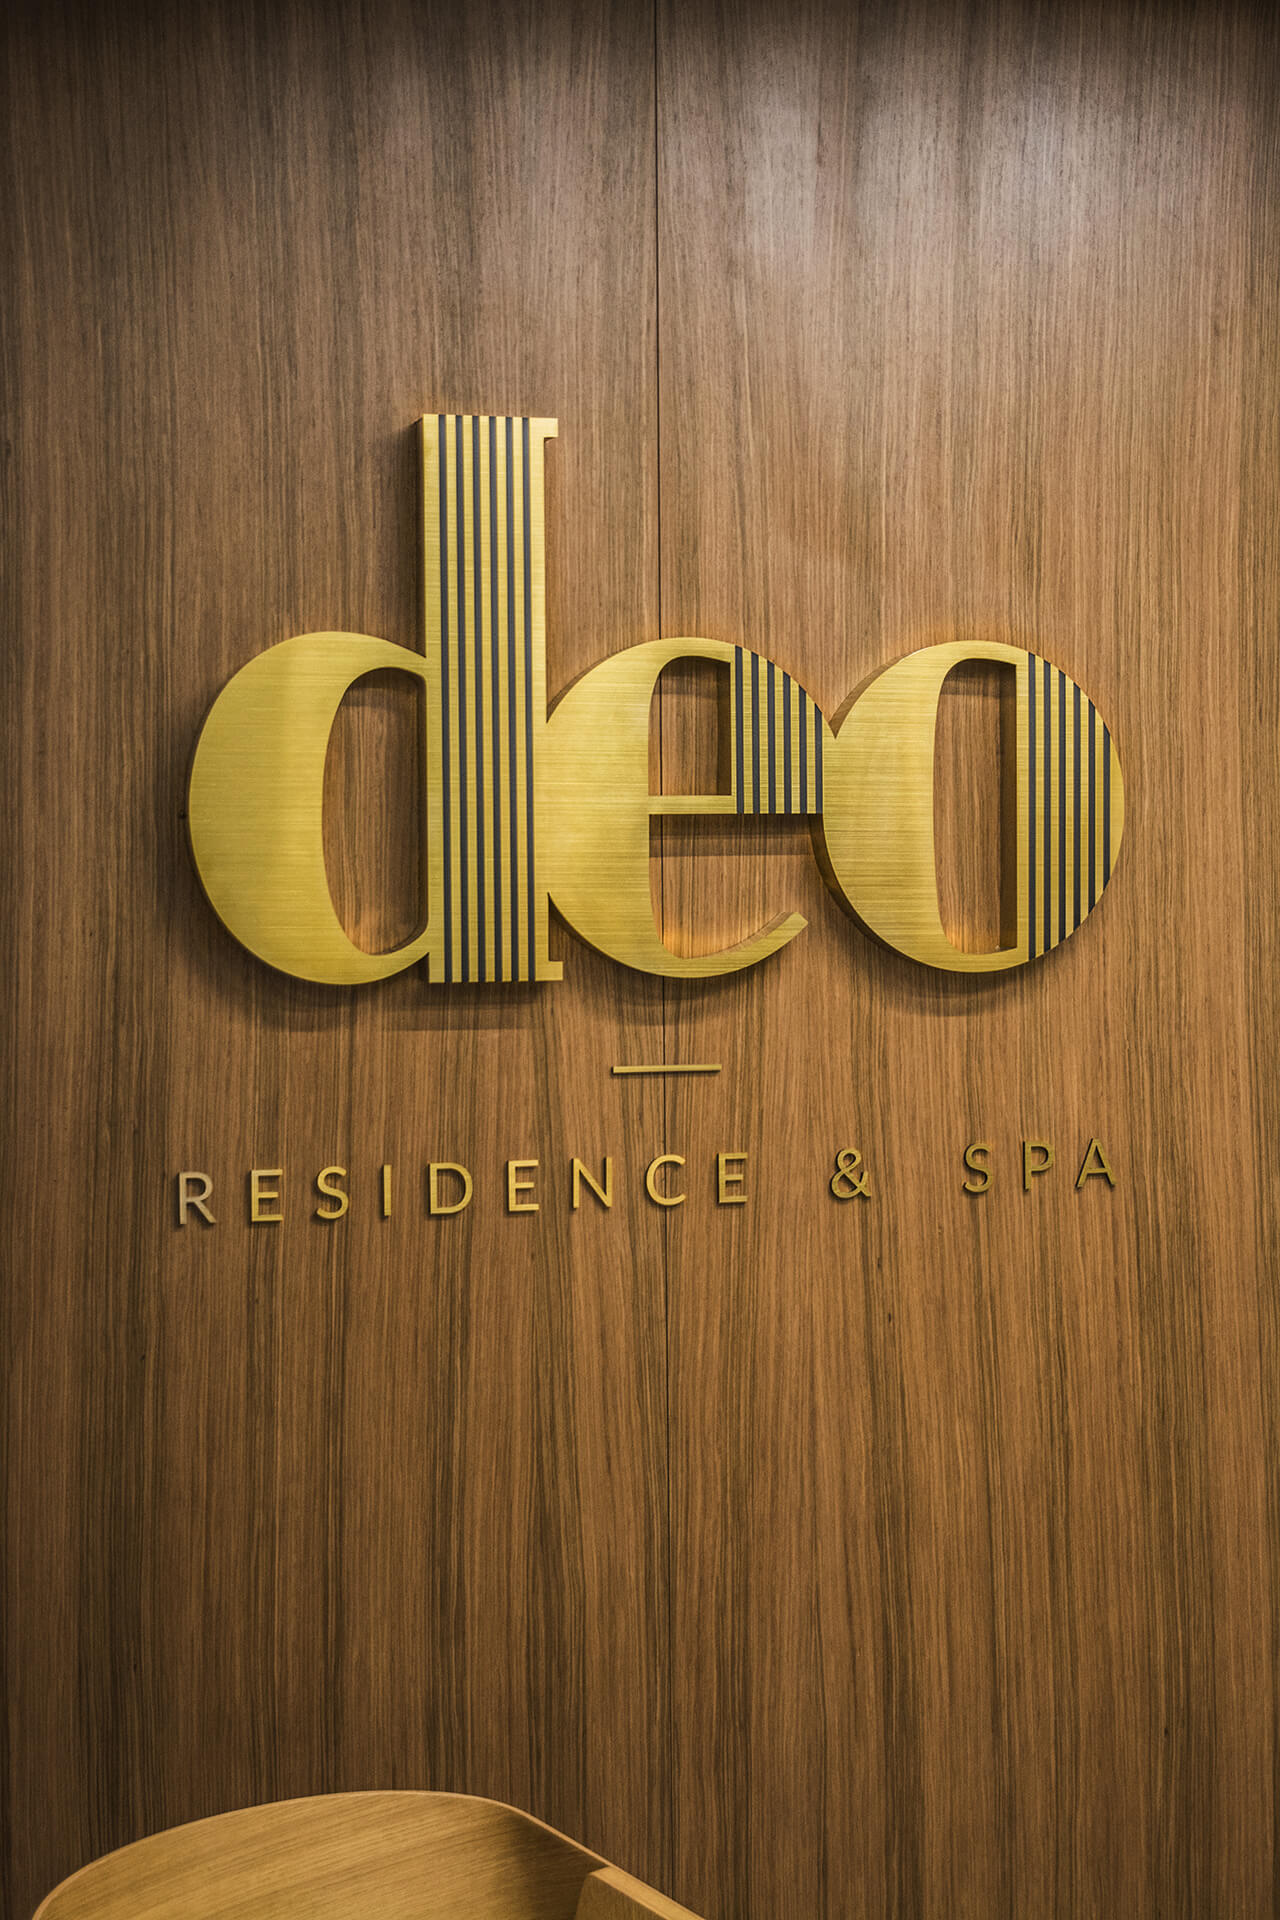 deo-residence-liters-from-solid-steel-brushed-lettering-over-the-entry-to-the-office-building-liters-at-height-mounted-to-the-wall-liters-on-sheets-liters-on-decks-logo-firm-gdansk